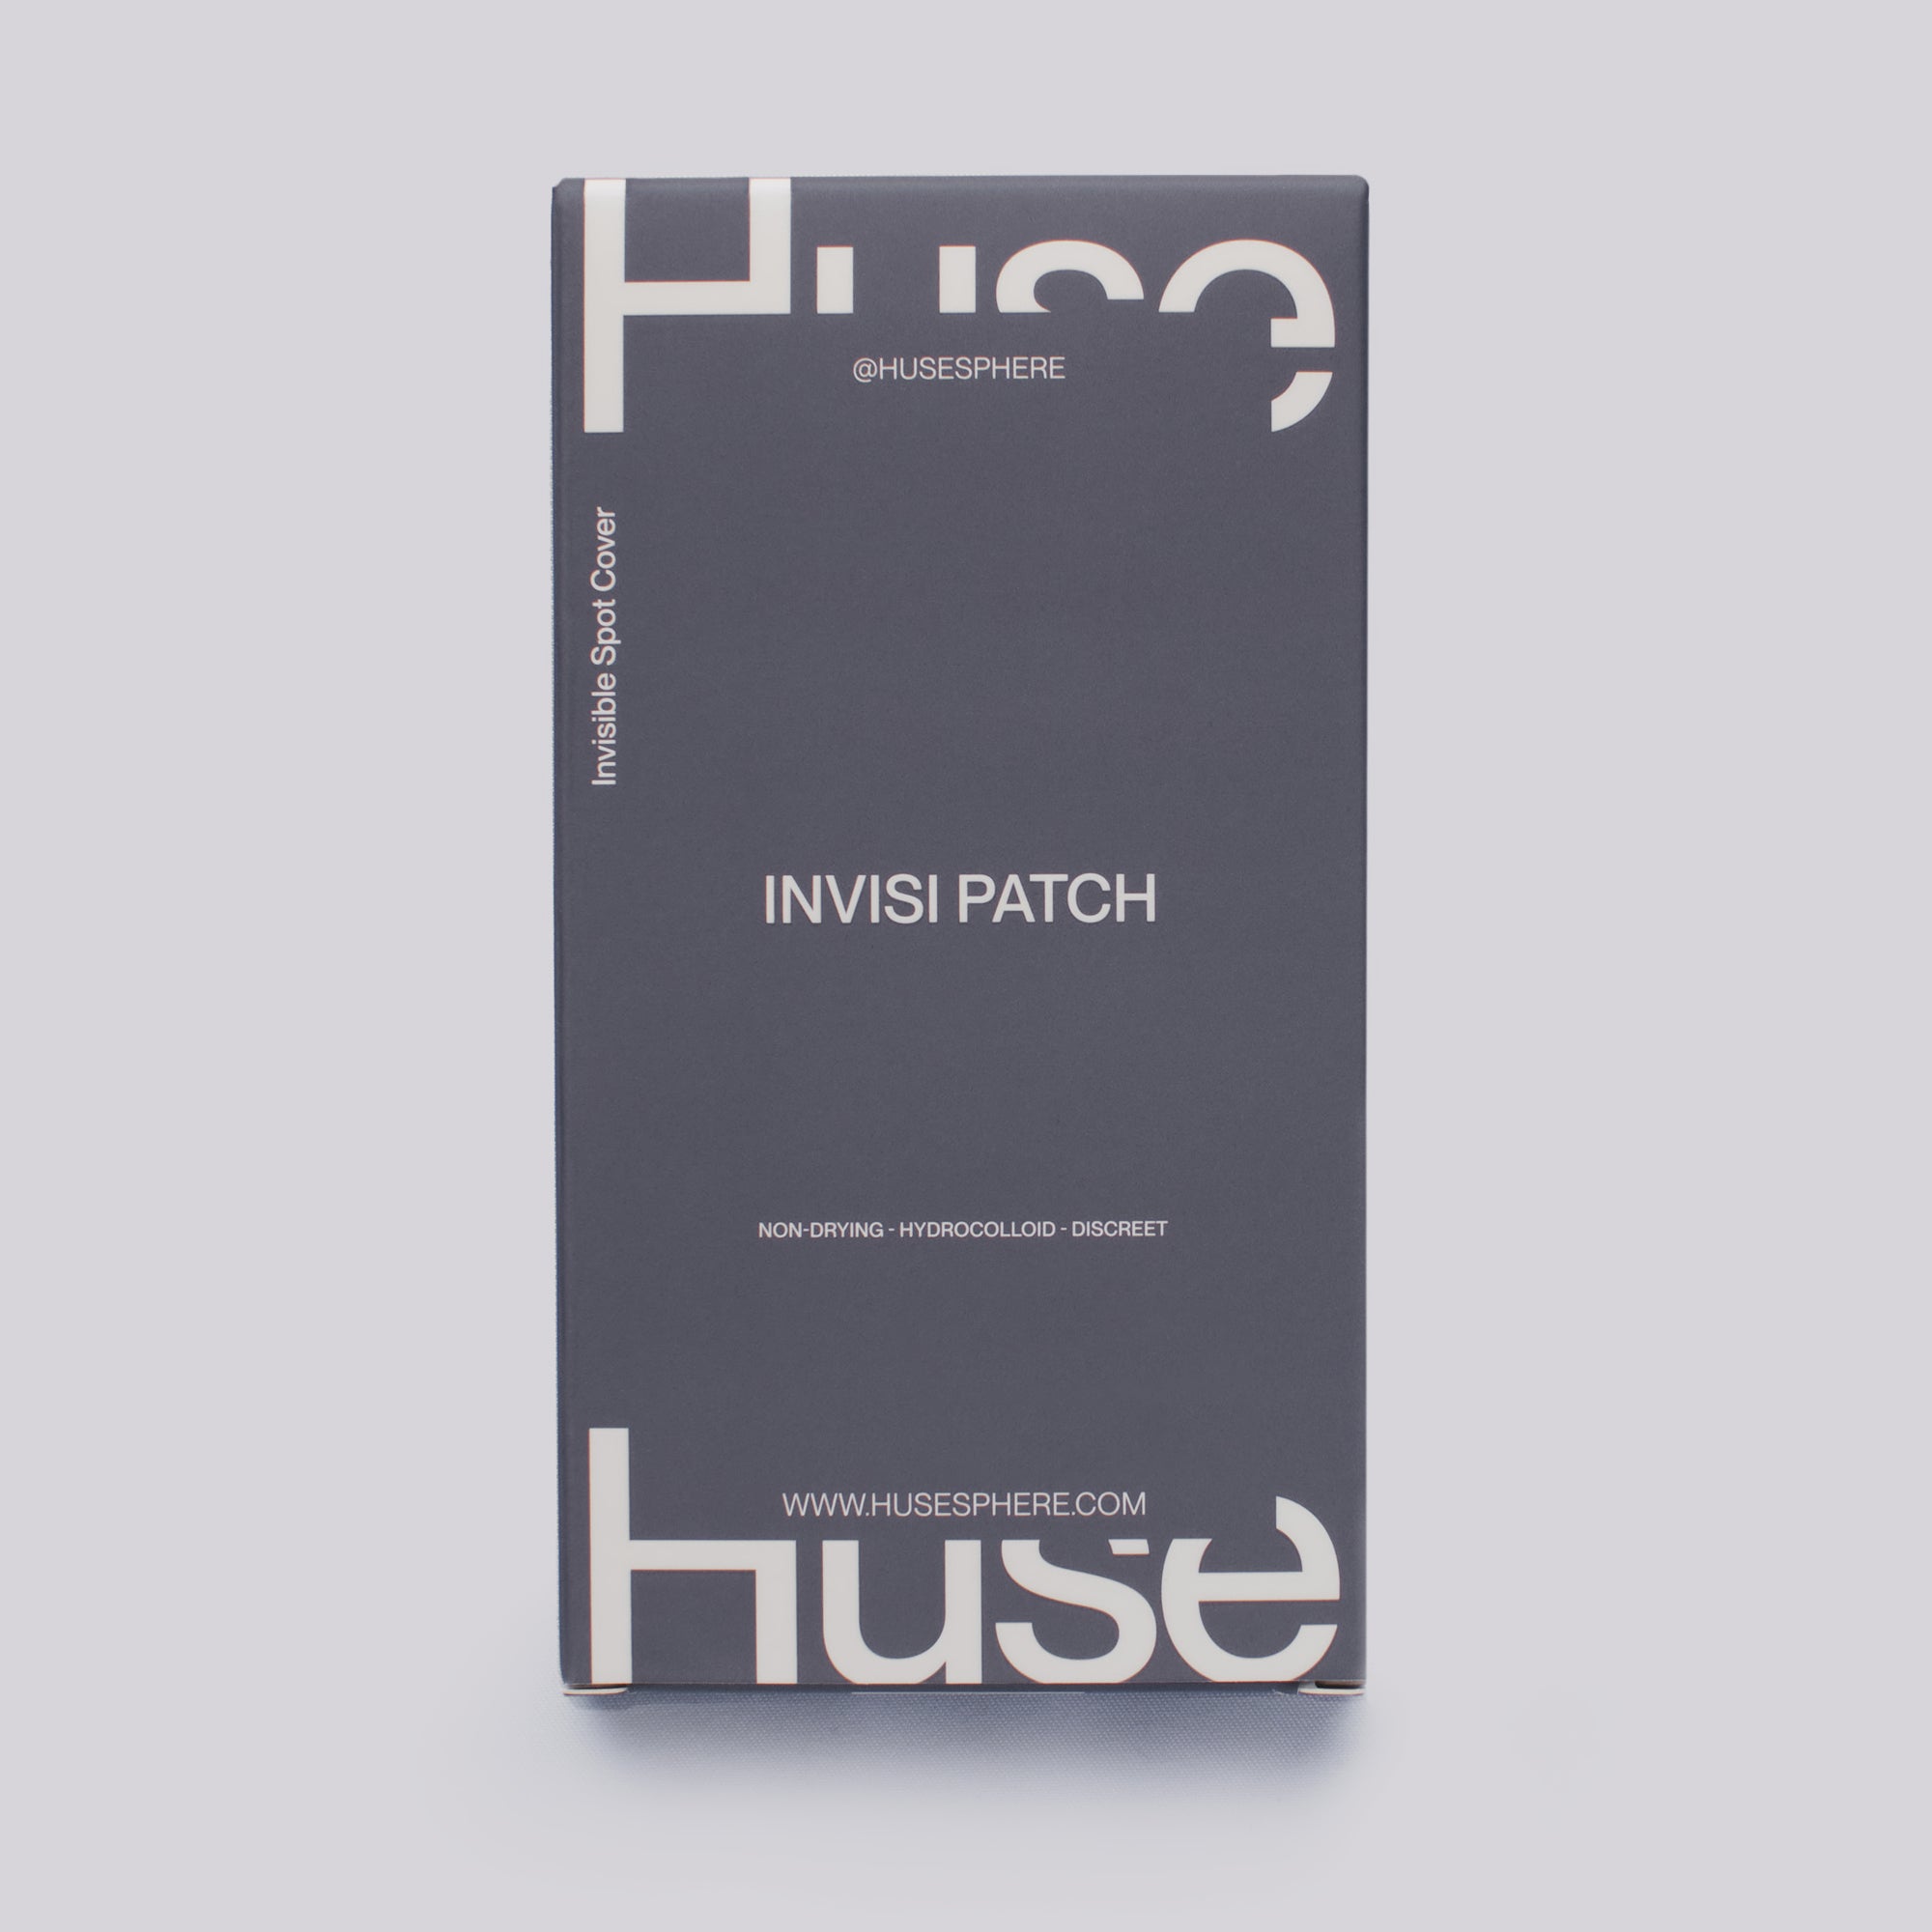 Huse Invisi Patch harnesses hydrocolloid technology, creating an optimal and moisture-rich environment for fast healing and protection. Best for acne-prone skin and day wear.